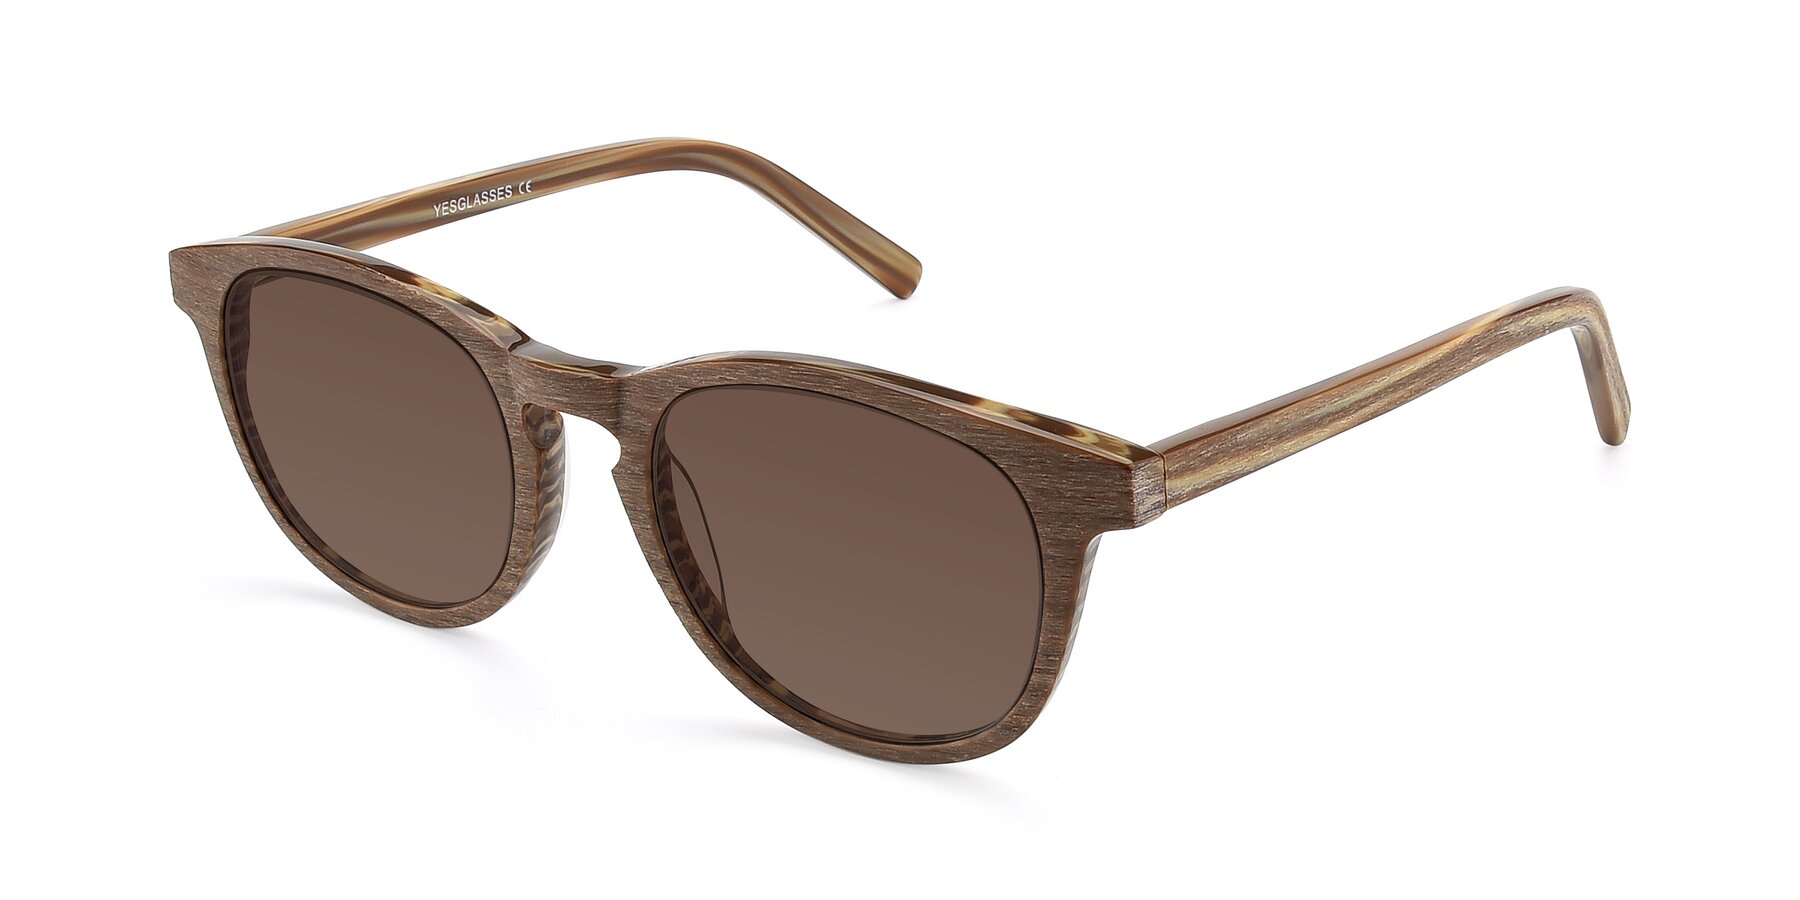 Angle of SR6044 in Brown-Wooden with Brown Tinted Lenses